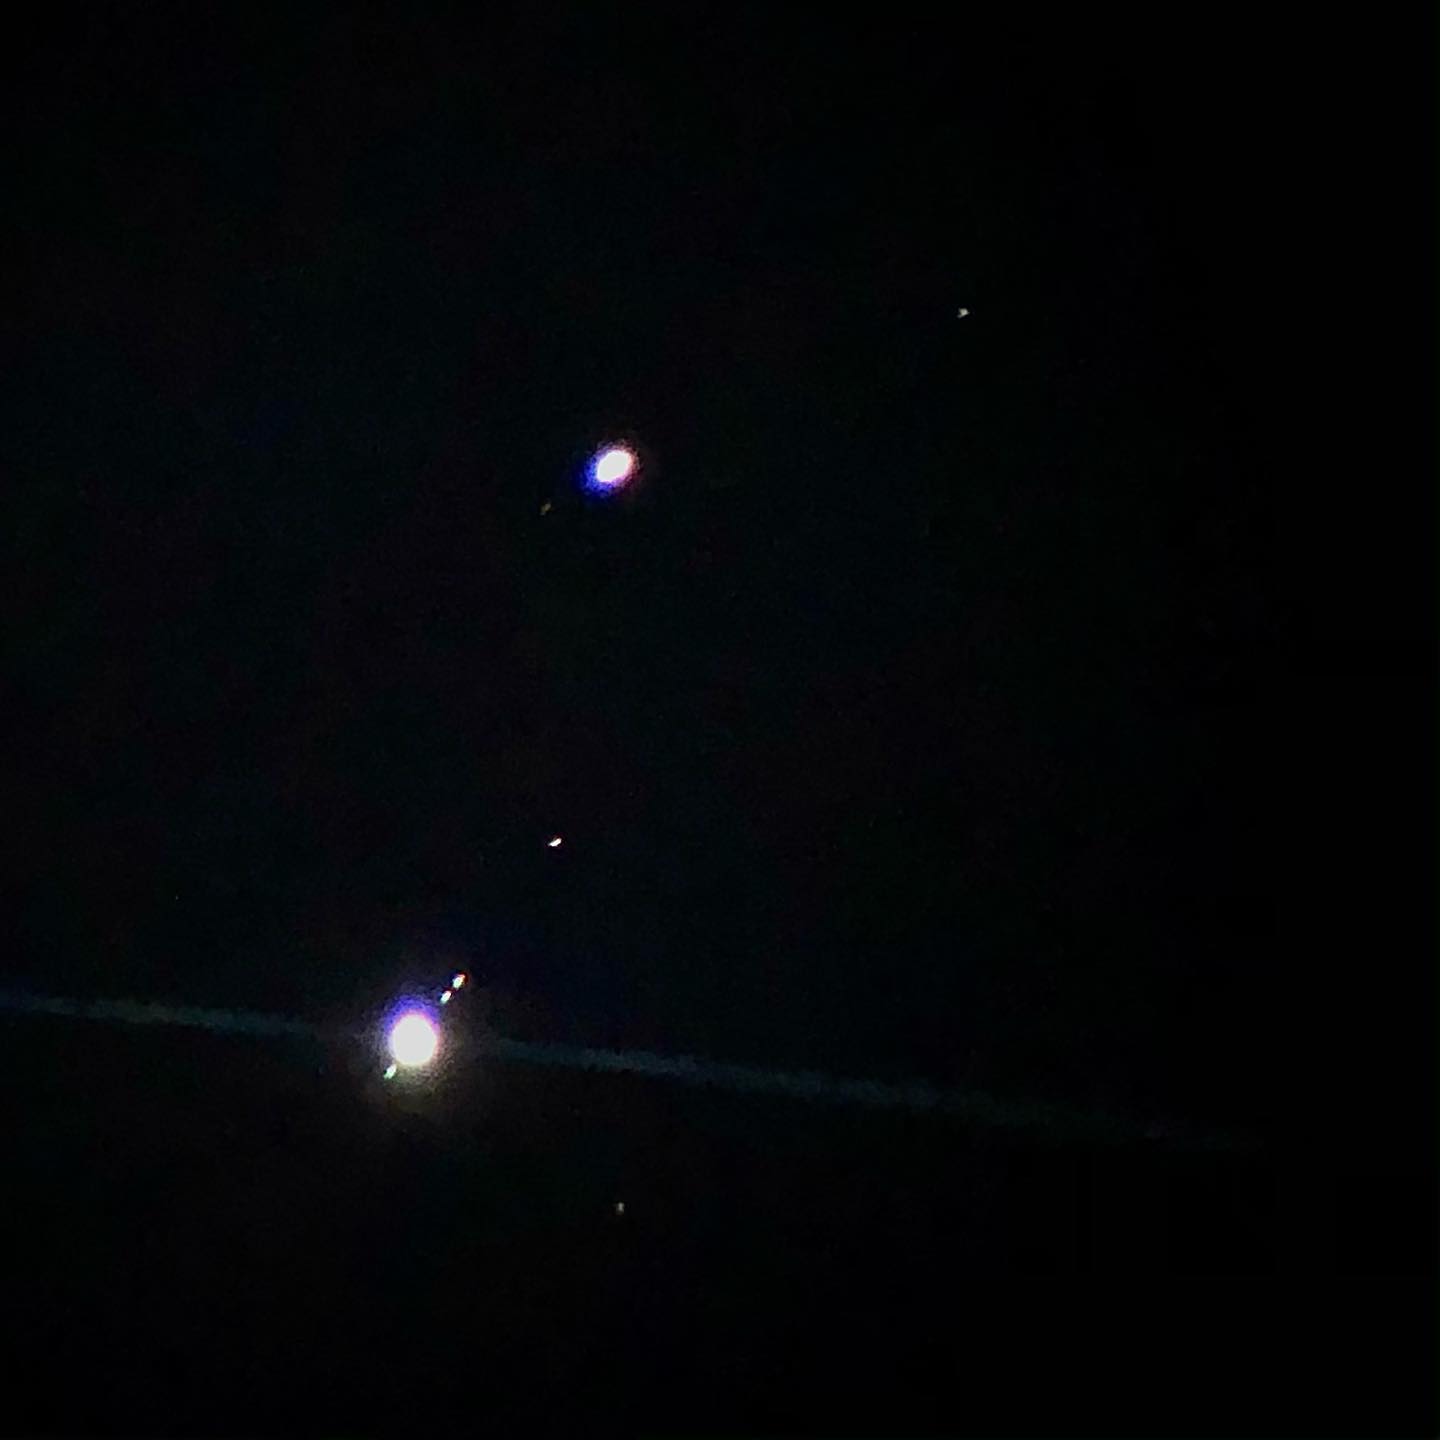 Leading up to the Great Conjunction! Jupiter and Saturn getting close